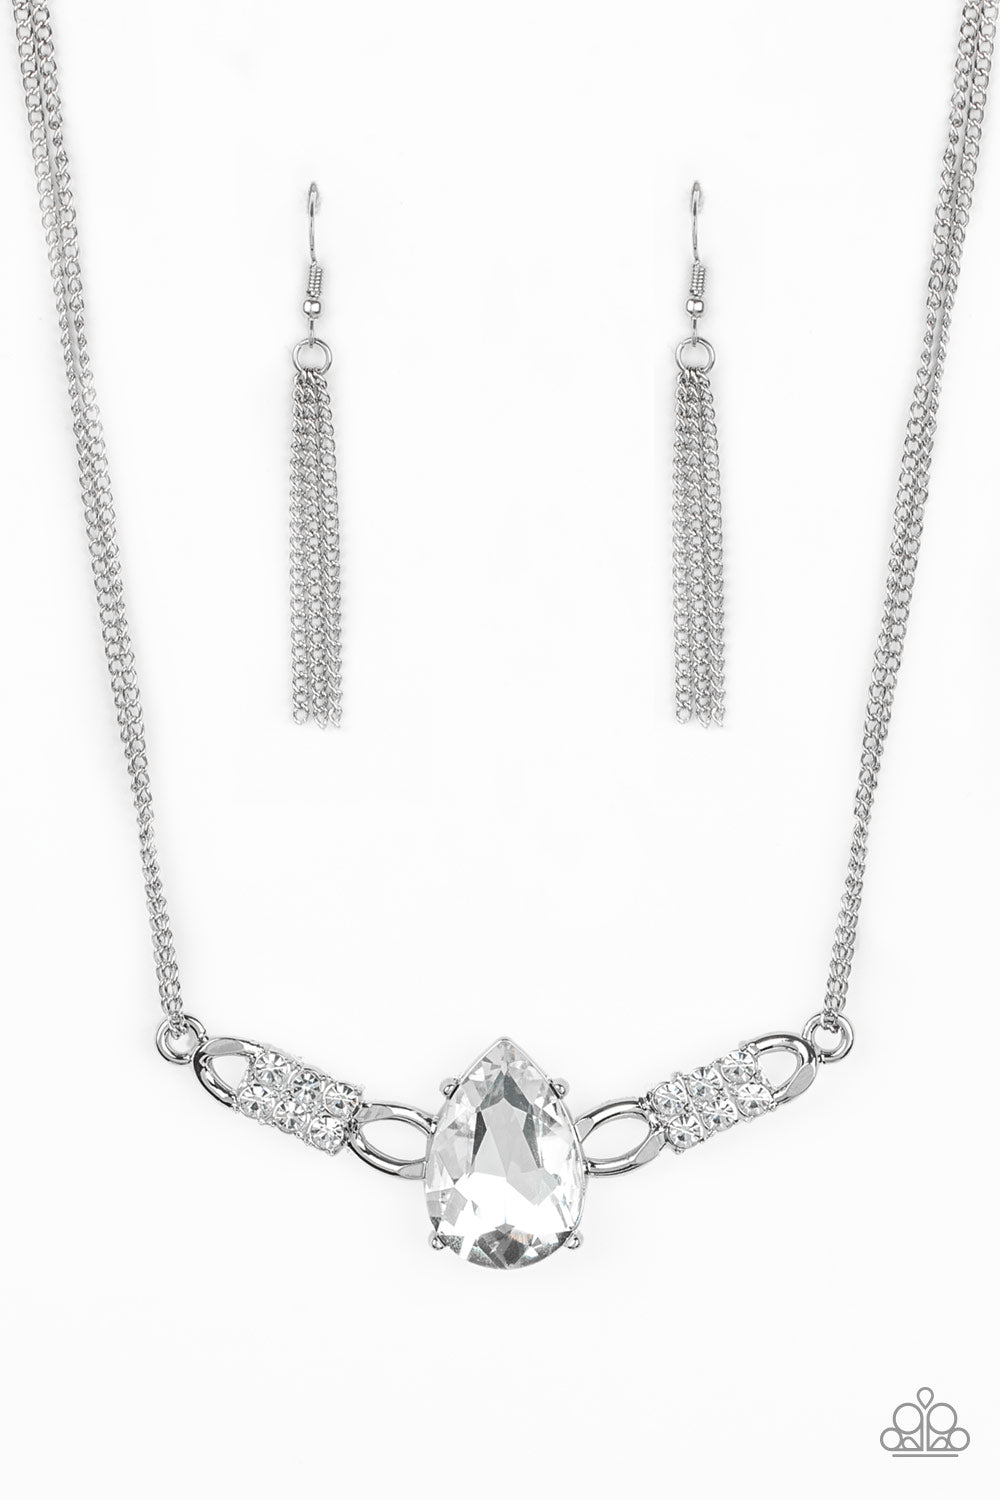 Way To Make An Entrance White Necklace - Paparazzi Accessories Item #JJG-N202 Cut into an alluring teardrop, an oversized white rhinestone gem attaches to bold silver frames radiating with glassy white rhinestones. The dramatic pendant attaches to doubled silver chains, swinging horizontally below the collar in a glamorous fashion. Features an adjustable clasp closure. All Paparazzi Accessories are lead free and nickel free!  Sold as one individual necklace. Includes one pair of matching earrings.